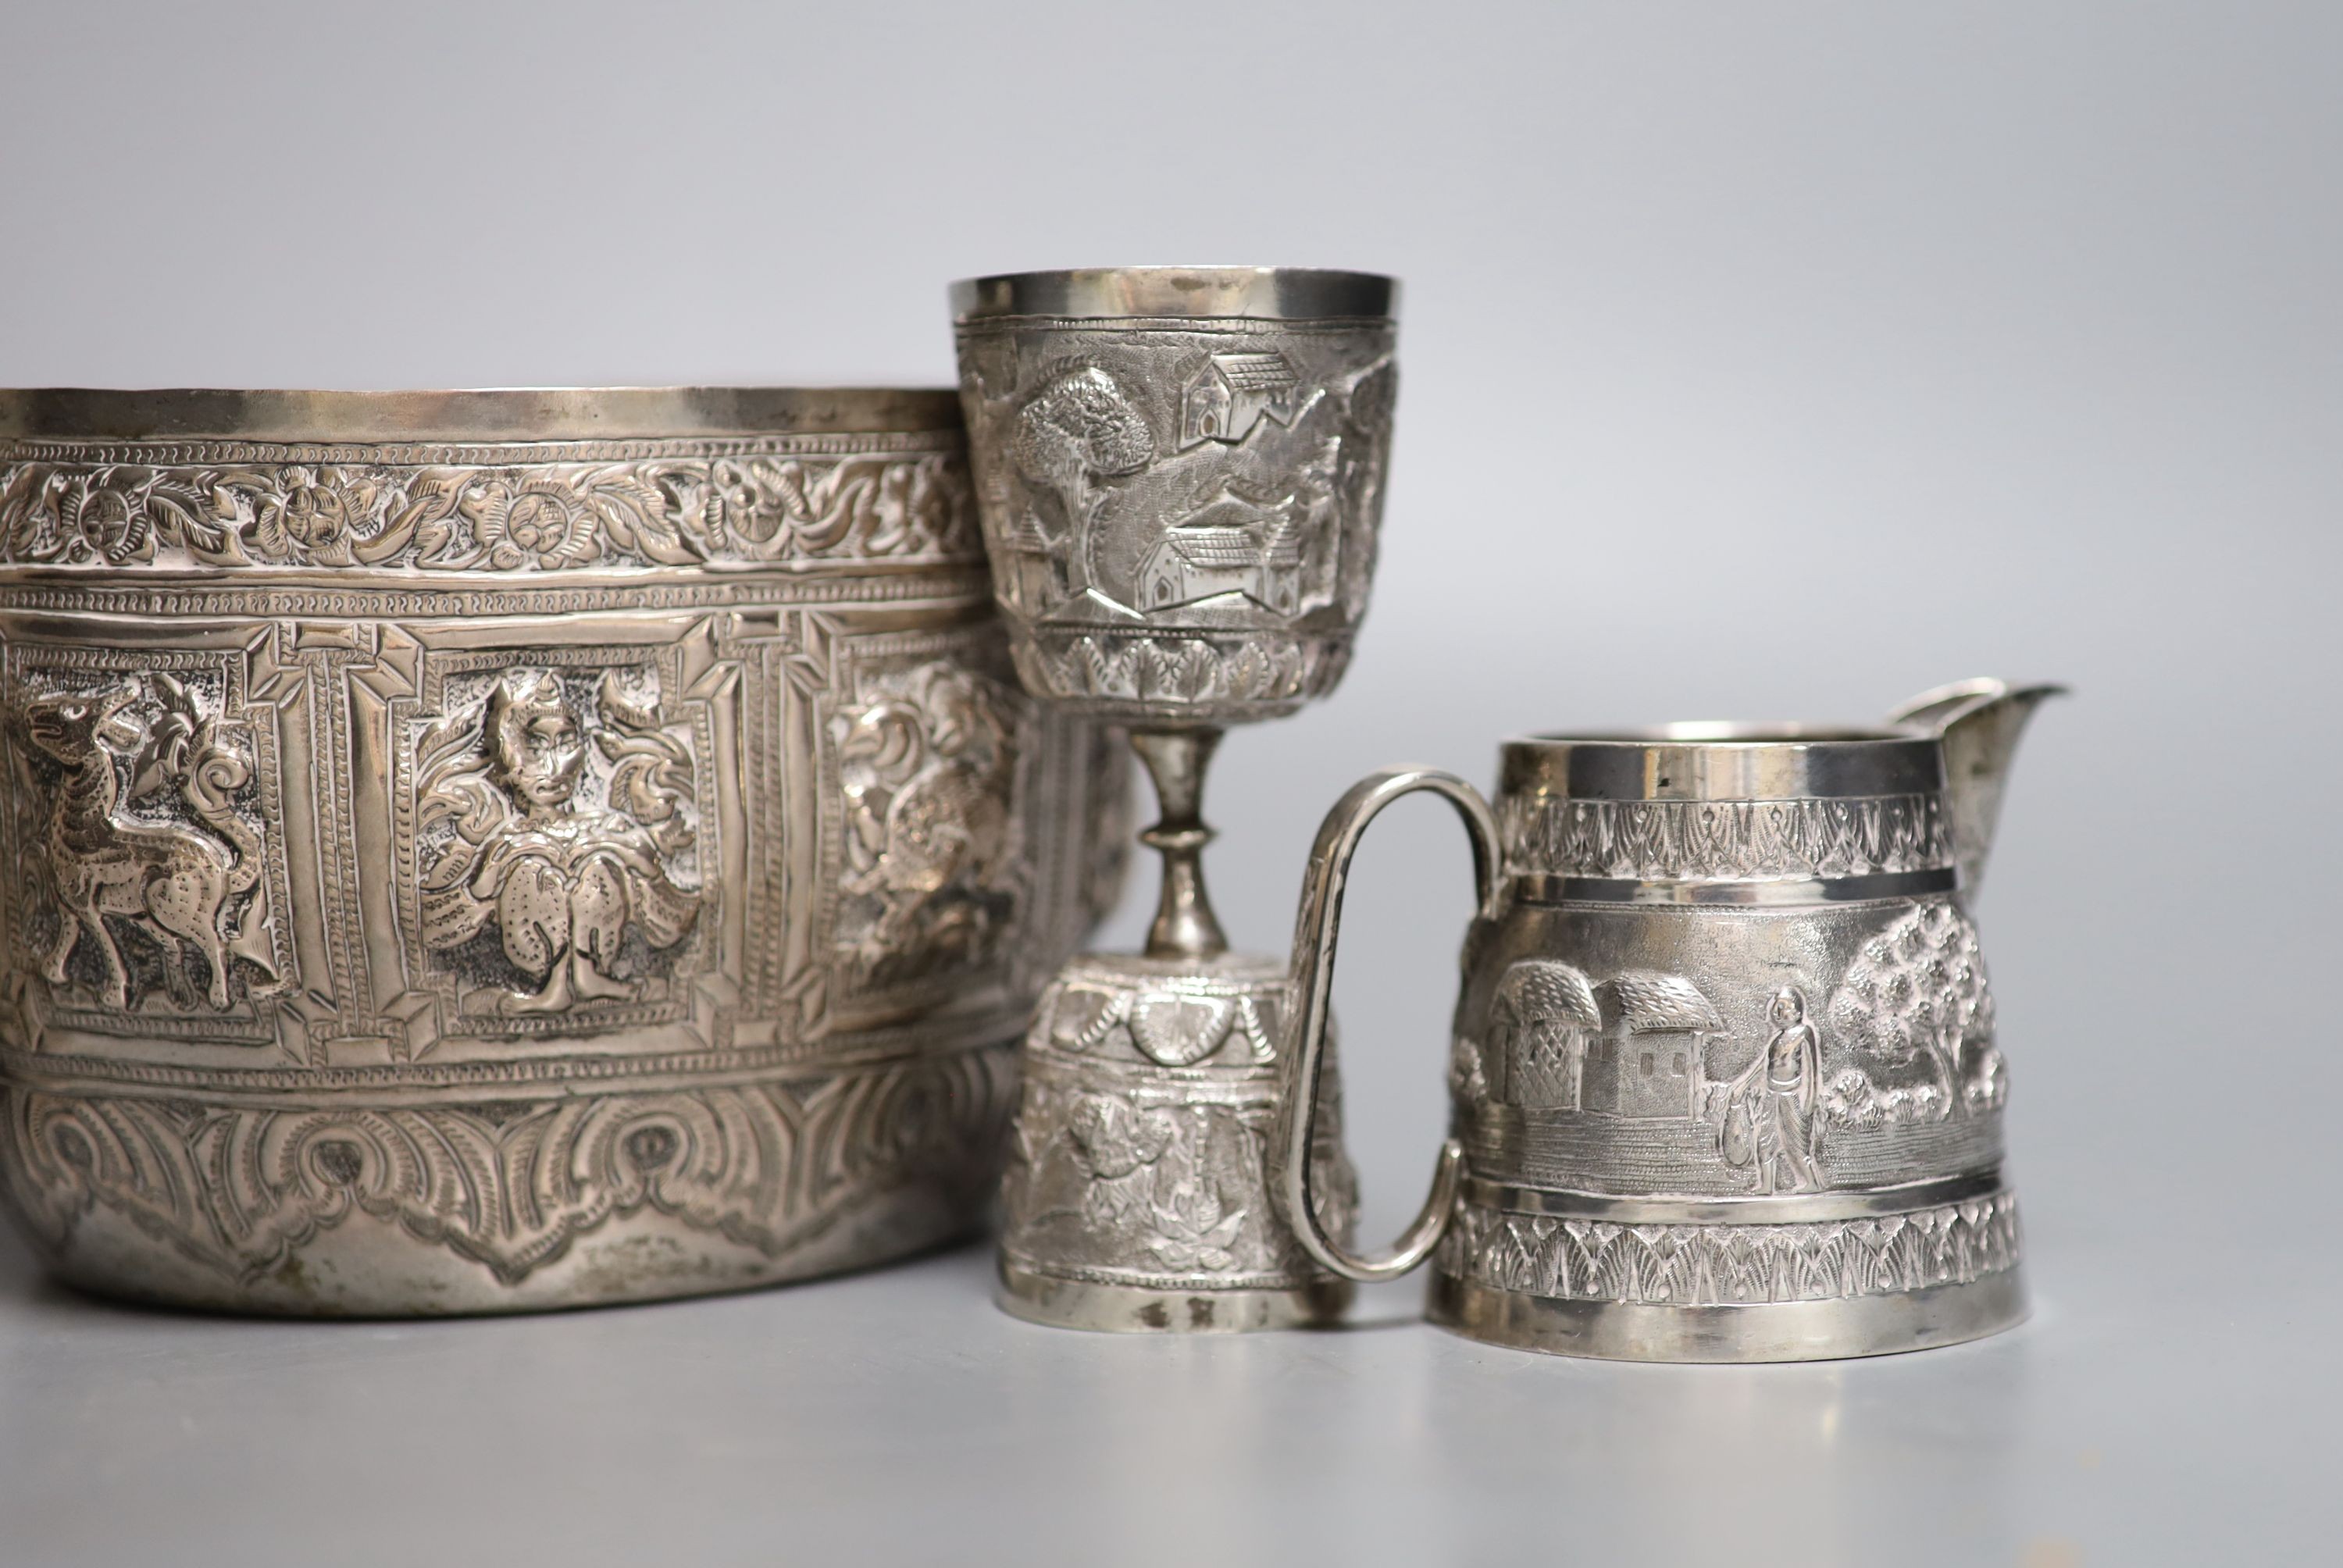 A group of Indian items including a white metal bowl embossed with animals, diameter 14.2cm, cream jug, measure, bowl, dish and beaker.